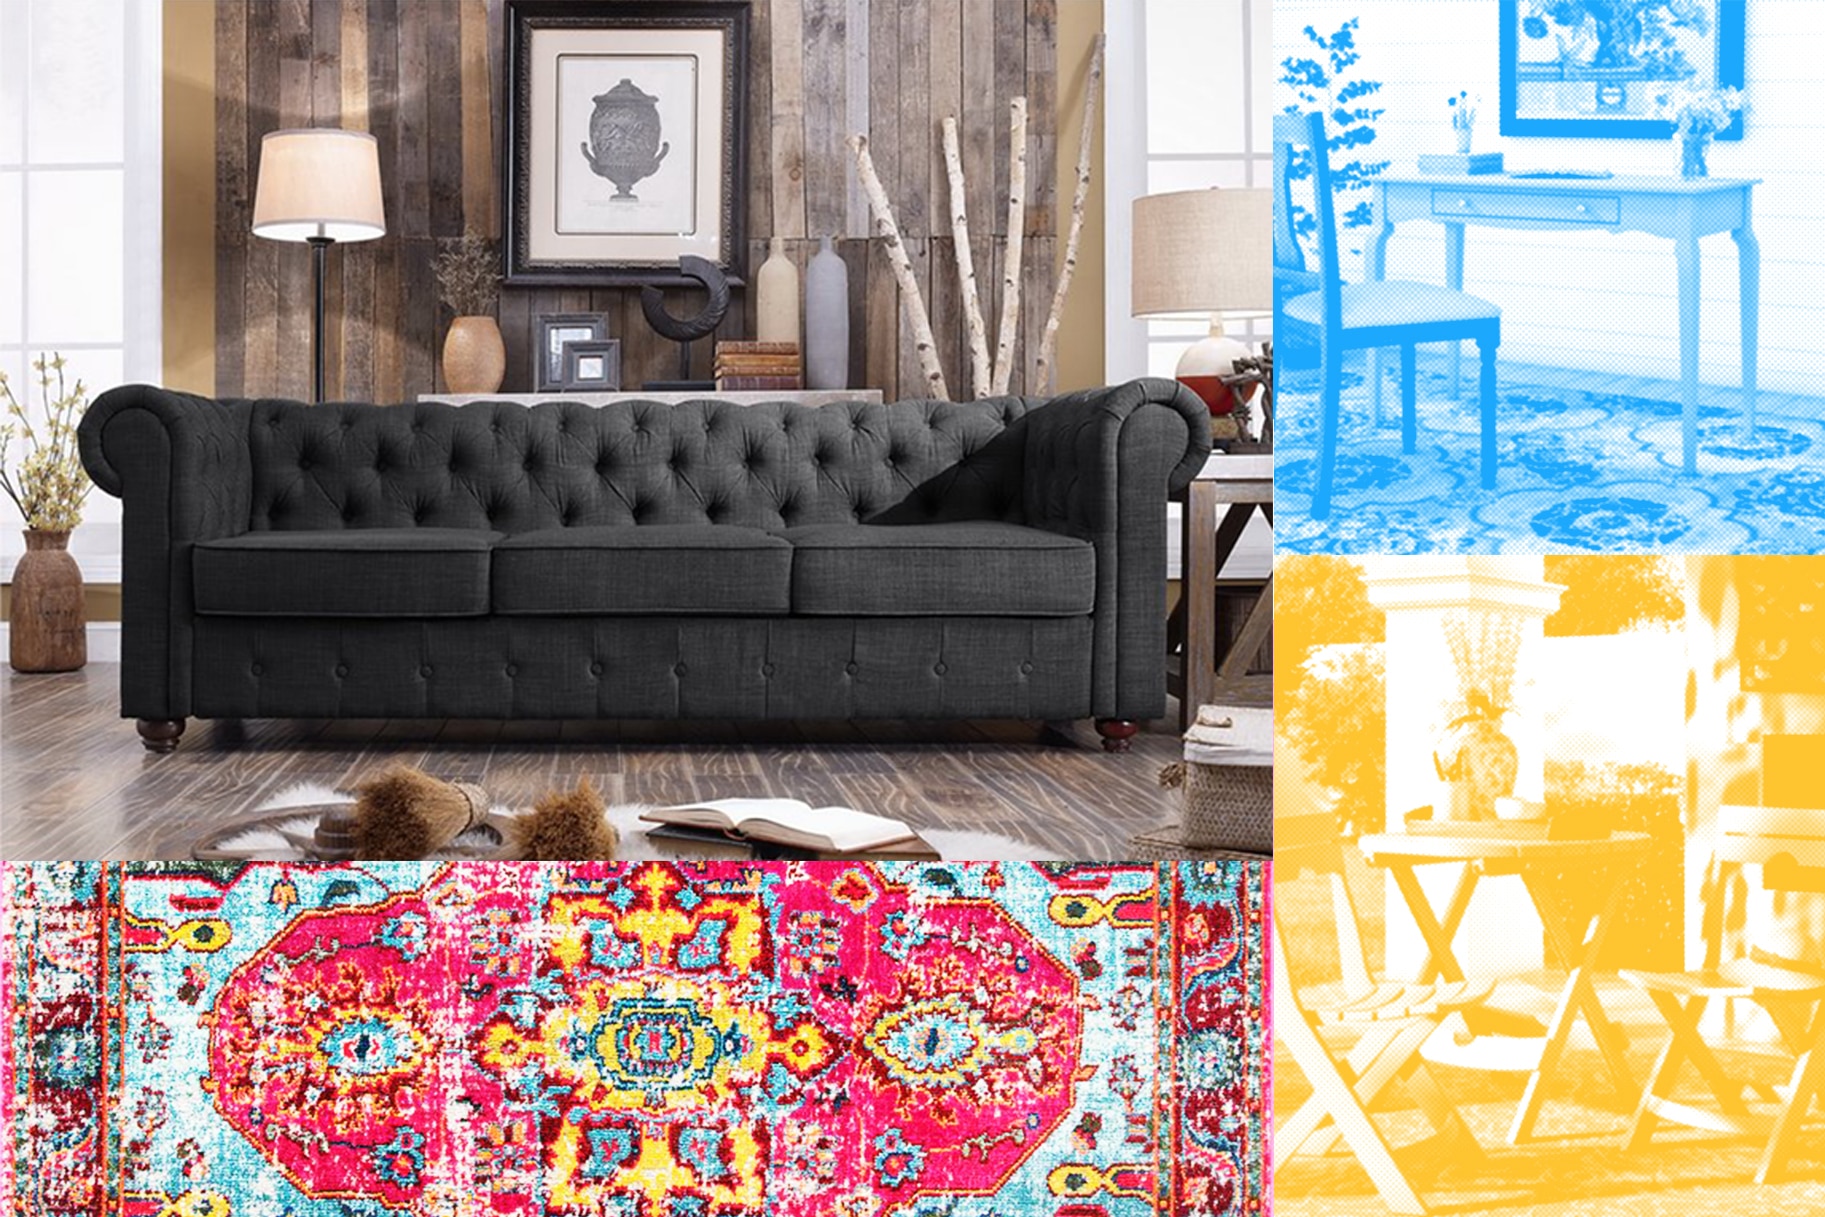 Wayfair July 4 Blowout Sale: Discount Furniture, Home Decor | Style